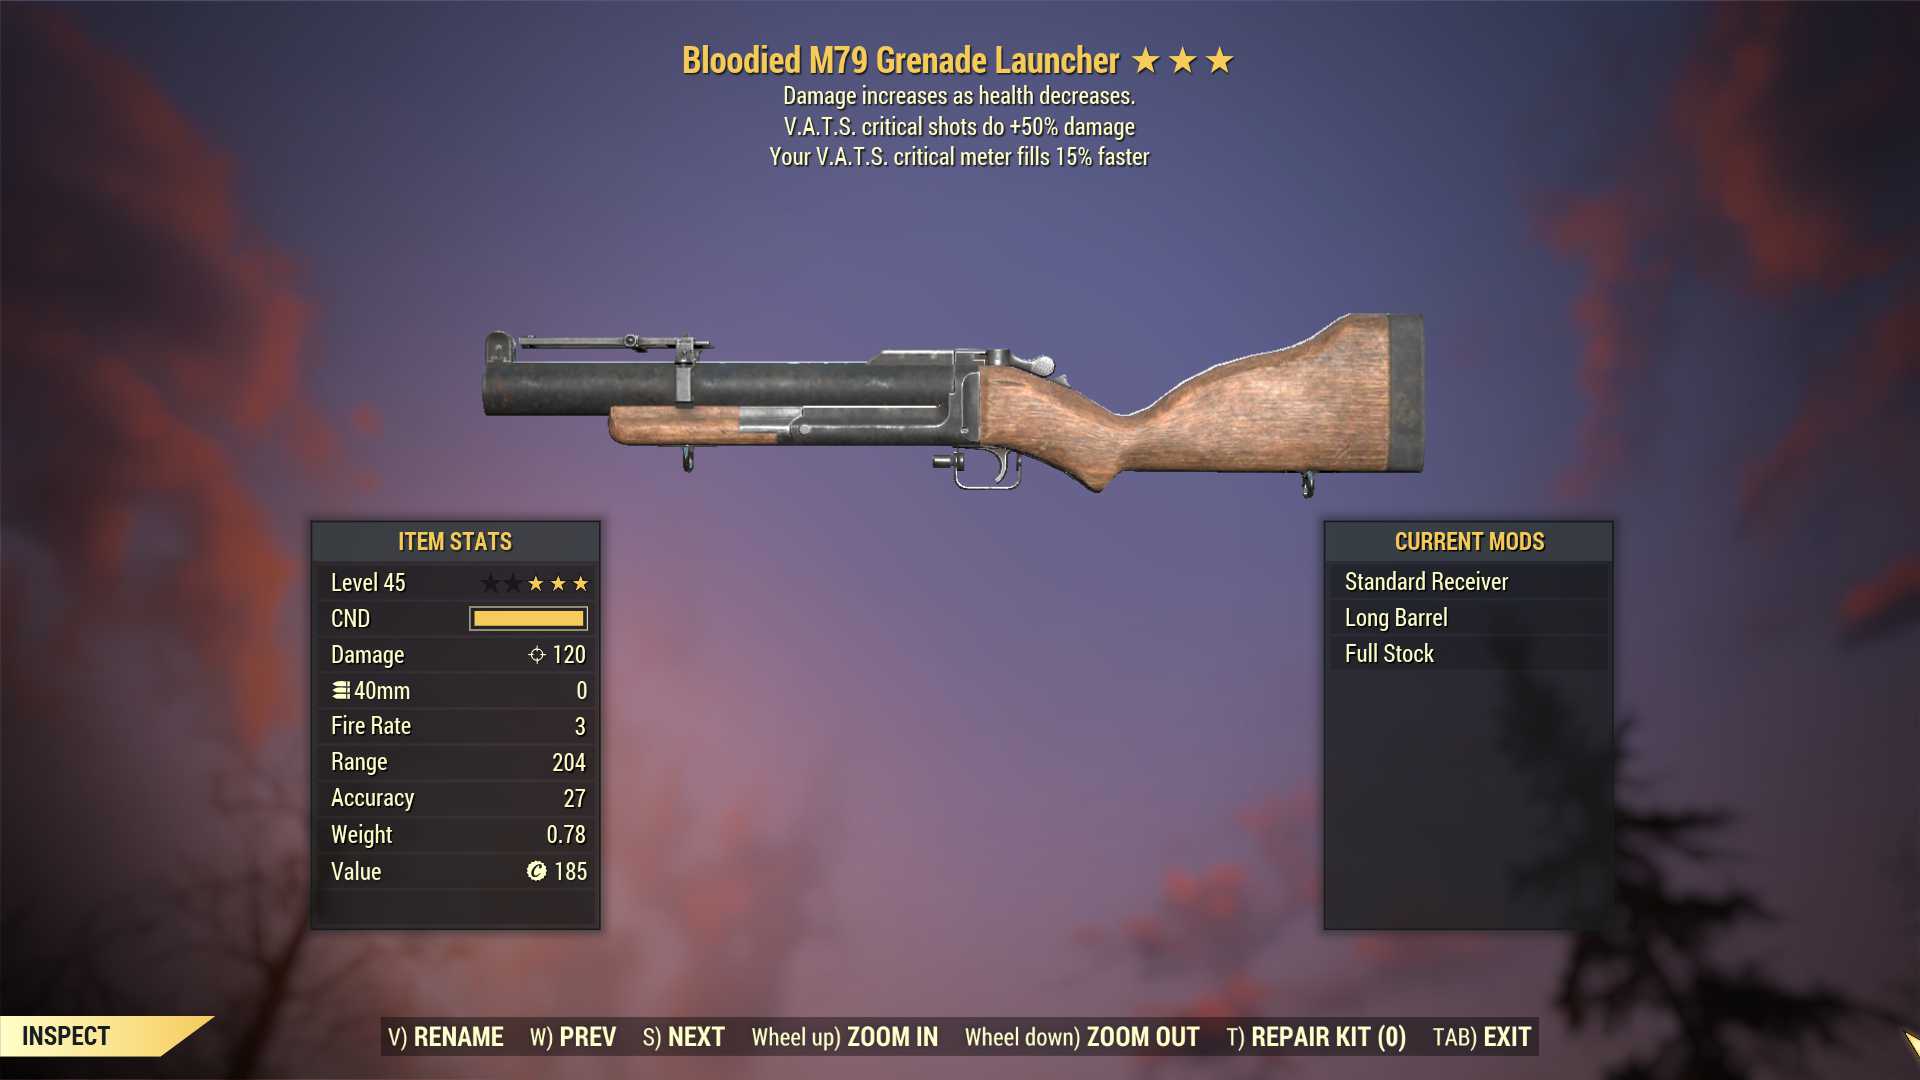 Bloodied M79 Grenade Launcher (+50% critical damage, VATS crit fills 15% faster)